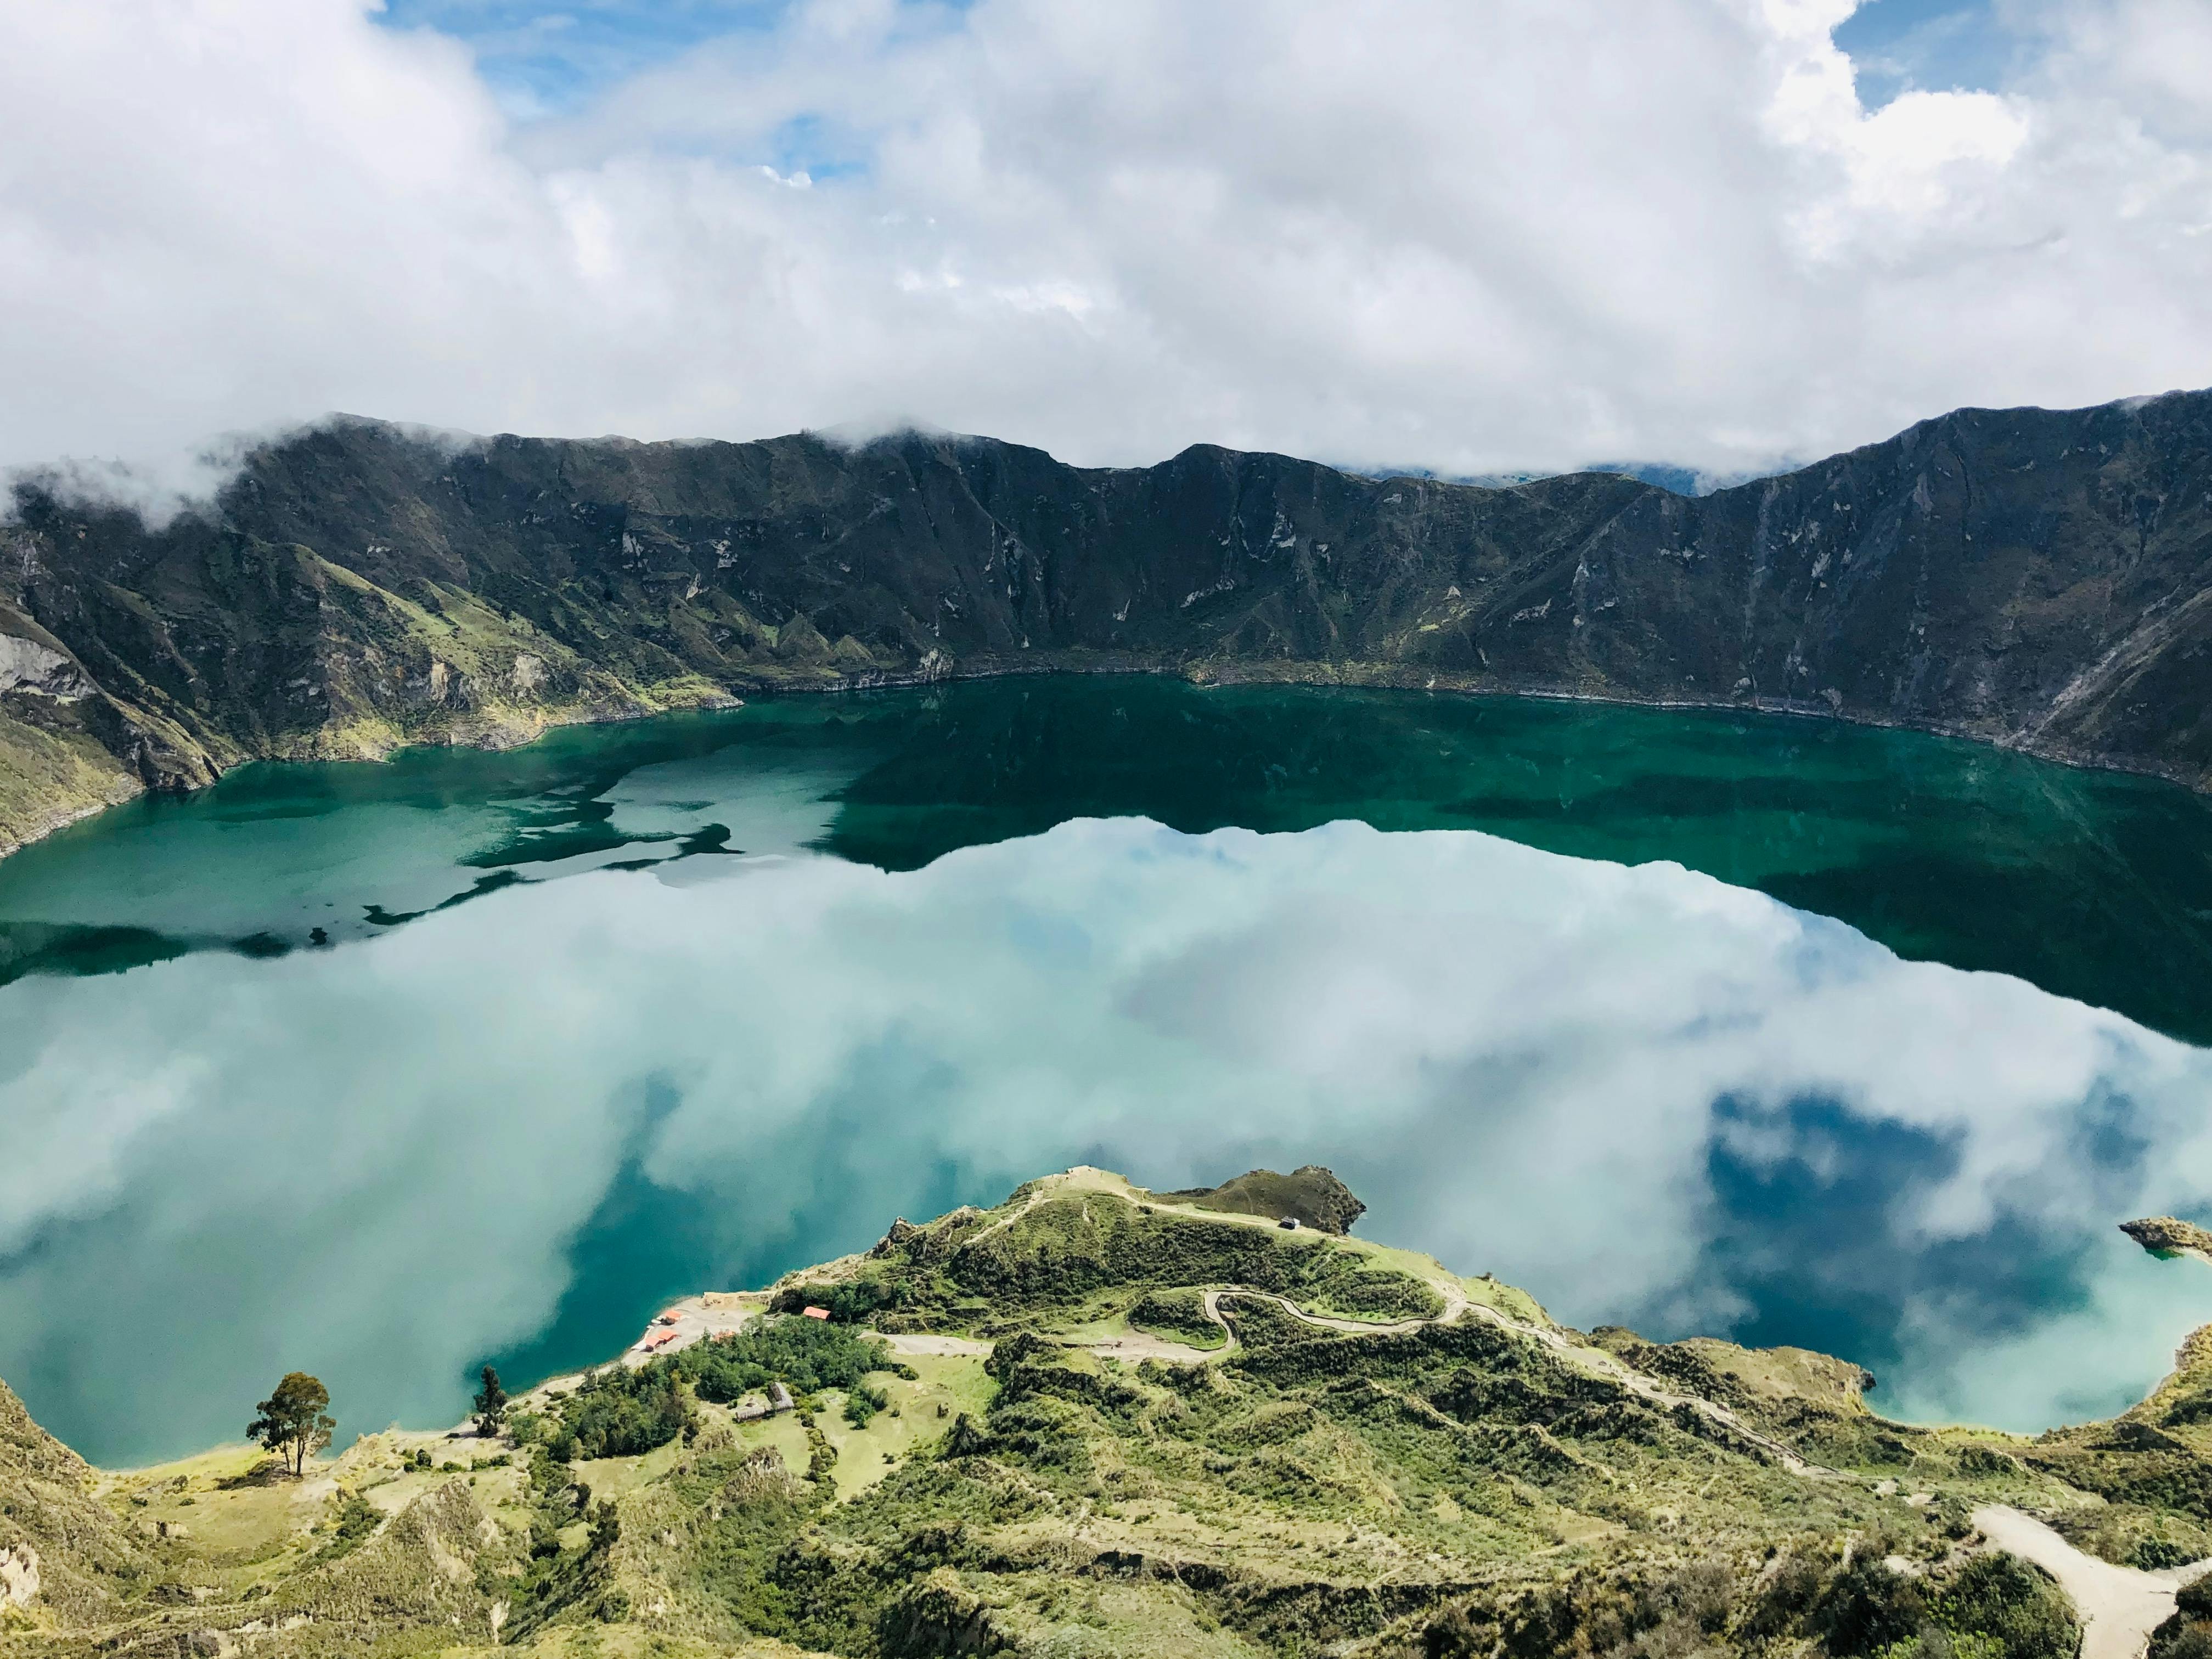 A view of Quilotoa Lake